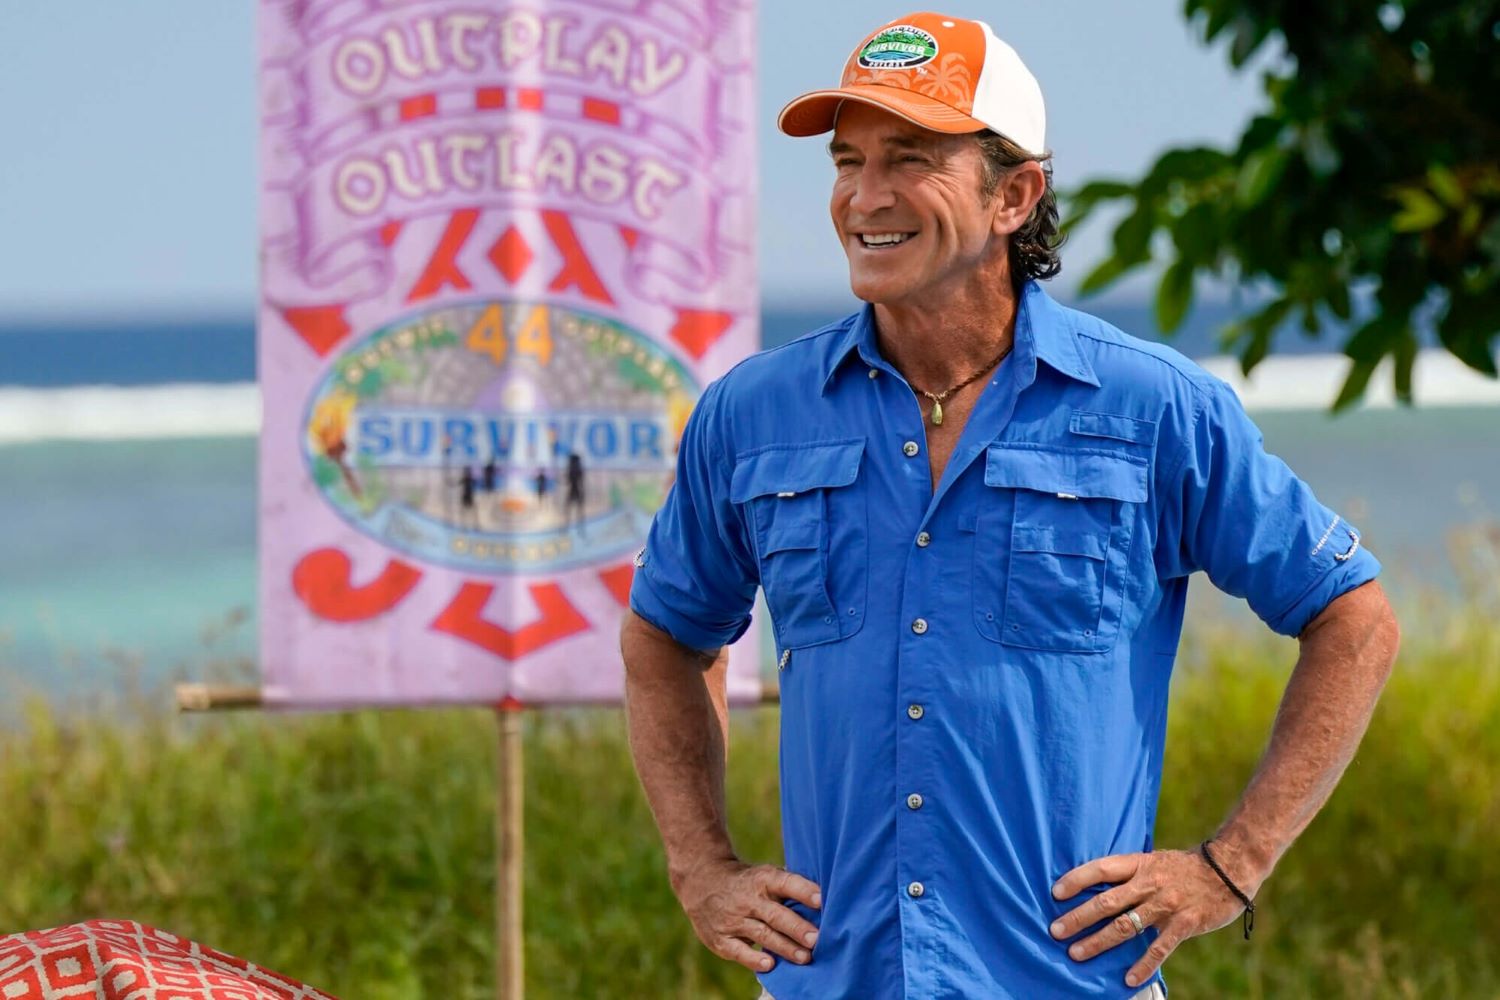 Jeff Probst, the host of 'Survivor 44' on CBS, wears a bright blue button-up shirt with rolled-up sleeves and an orange and white 'Survivor' baseball cap.